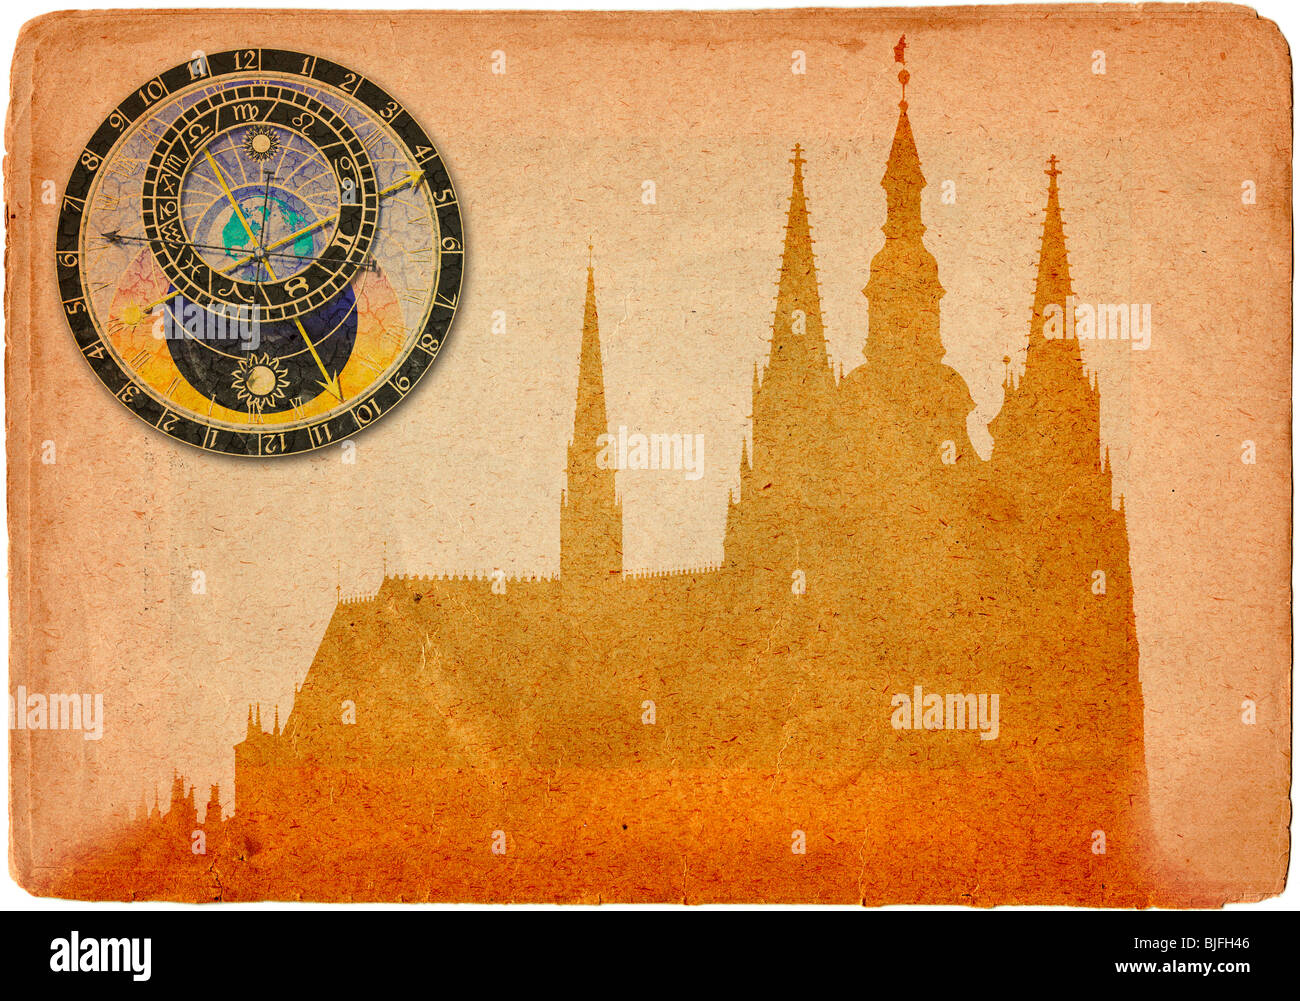 Prague castle and Cathedral of St Vitus with astronomical clock in grunge style Stock Photo